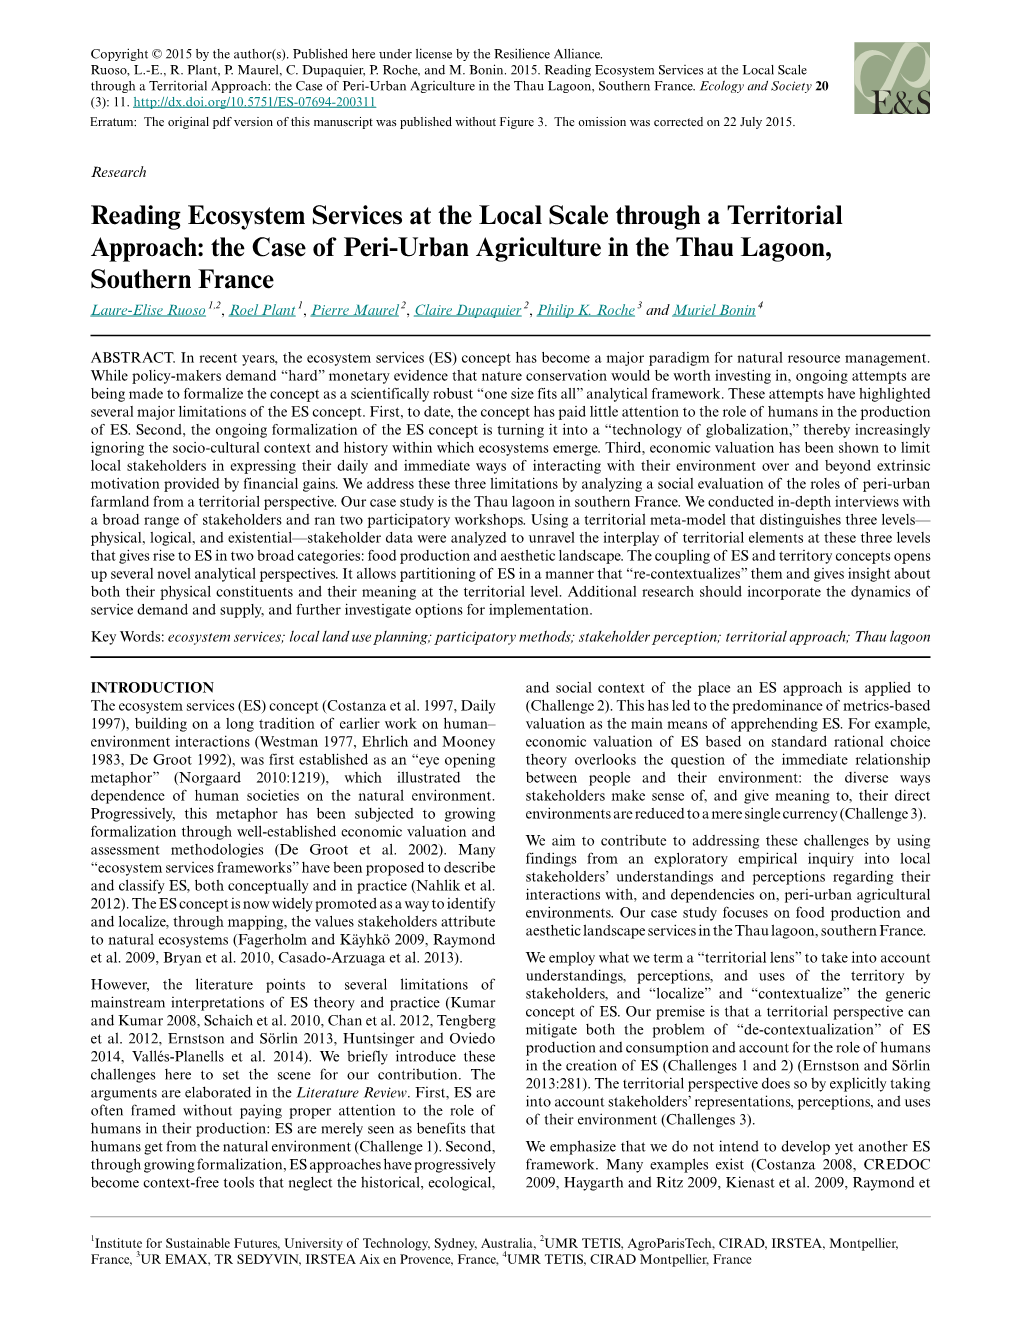 Reading Ecosystem Services at the Local Scale Through a Territorial Approach: the Case of Peri-Urban Agriculture in the Thau Lagoon, Southern France